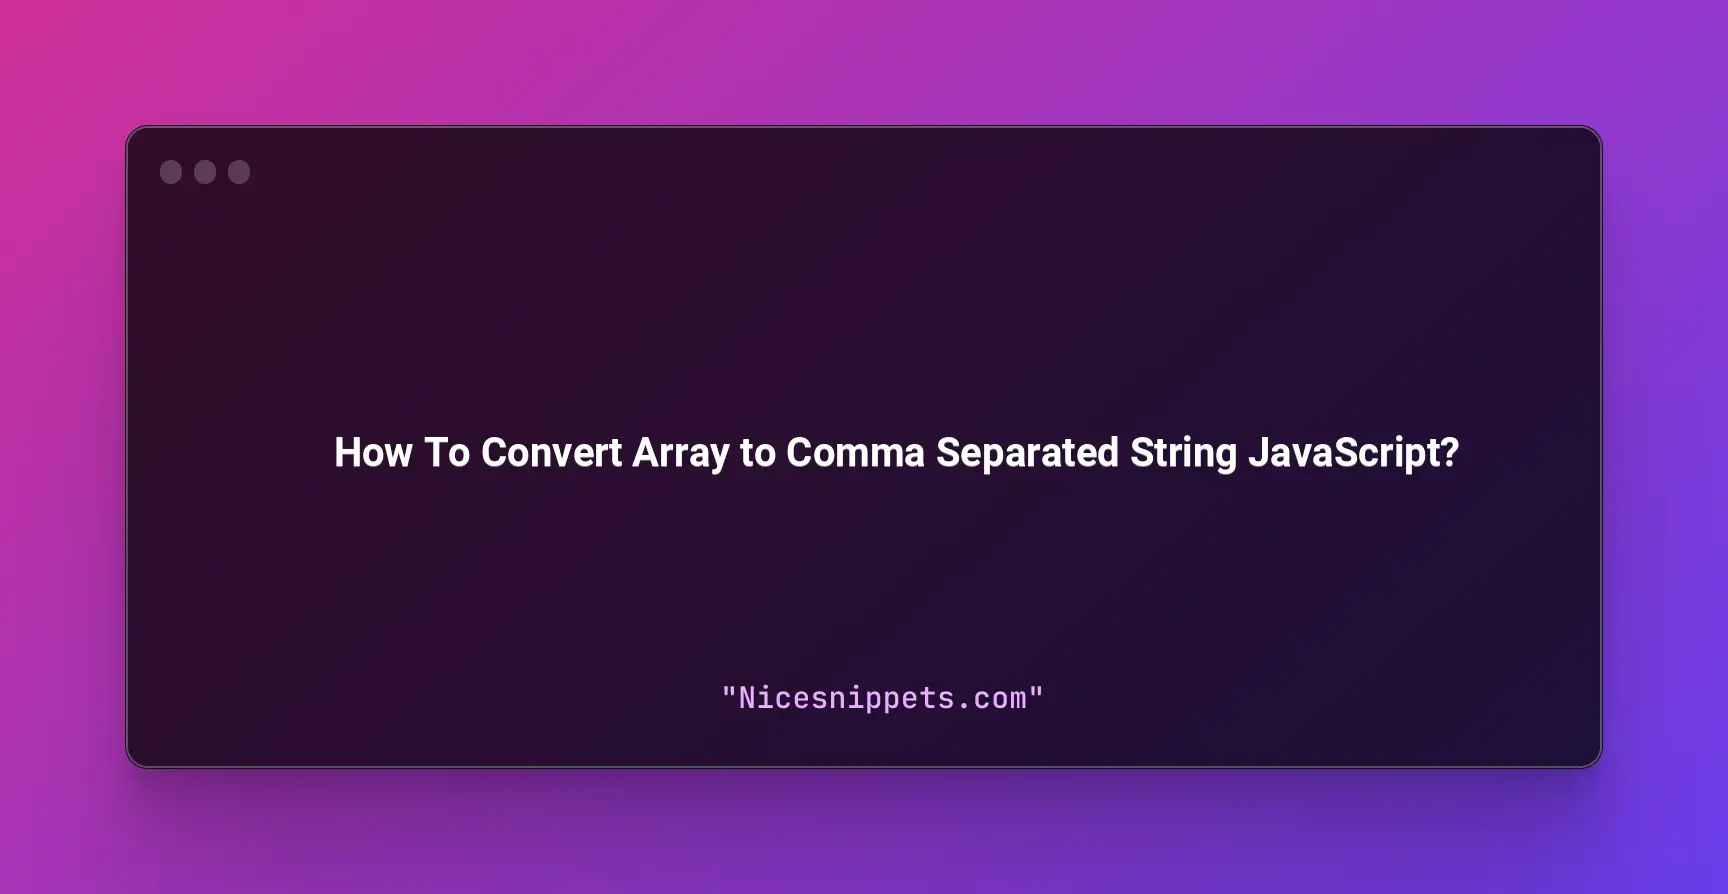 How To Convert Array to Comma Separated String JavaScript?